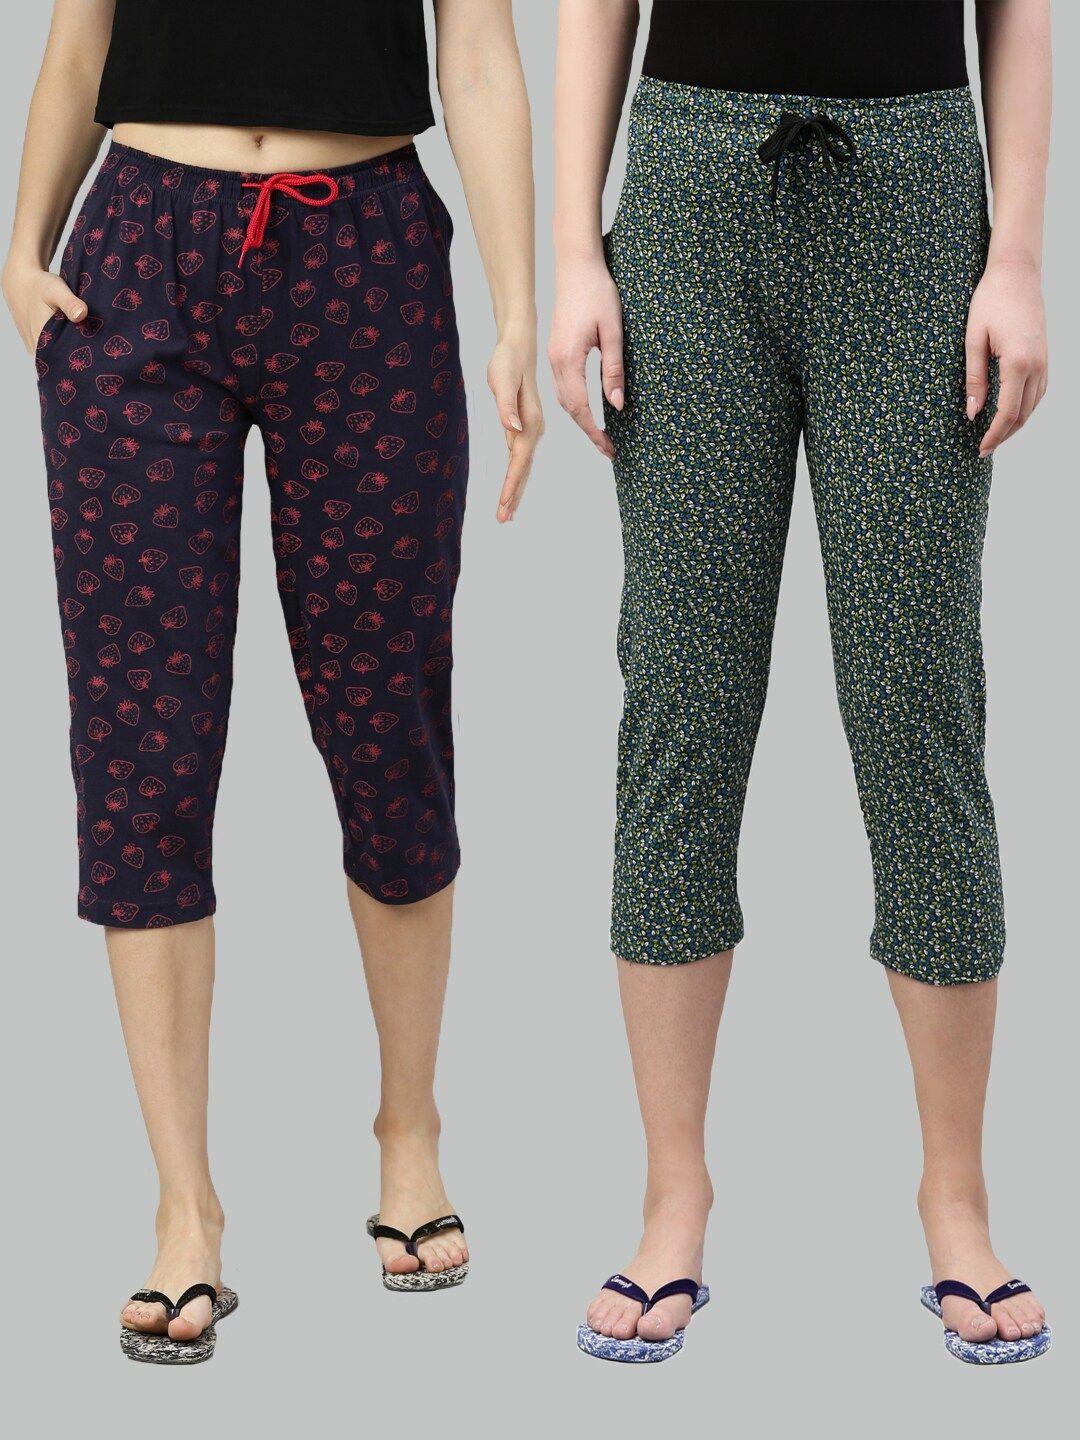 kryptic women pack of 2 navy blue & green printed cotton lounge capris